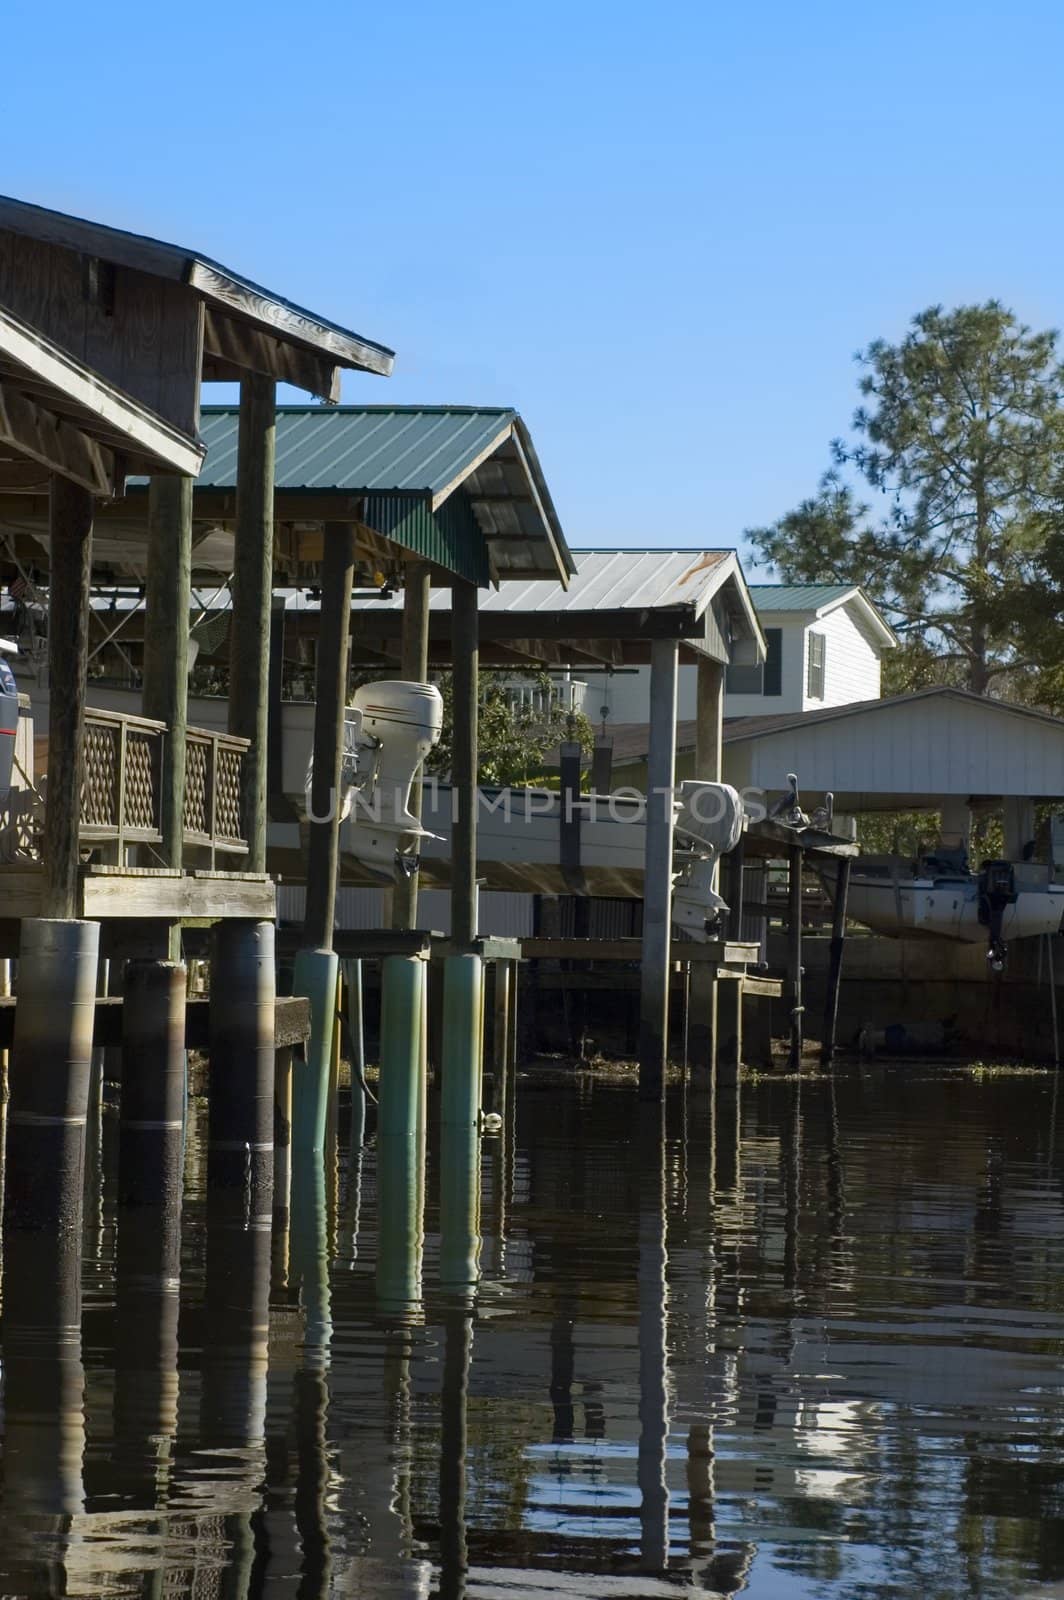 Boat houses on the canal in Suwannee, Florida.